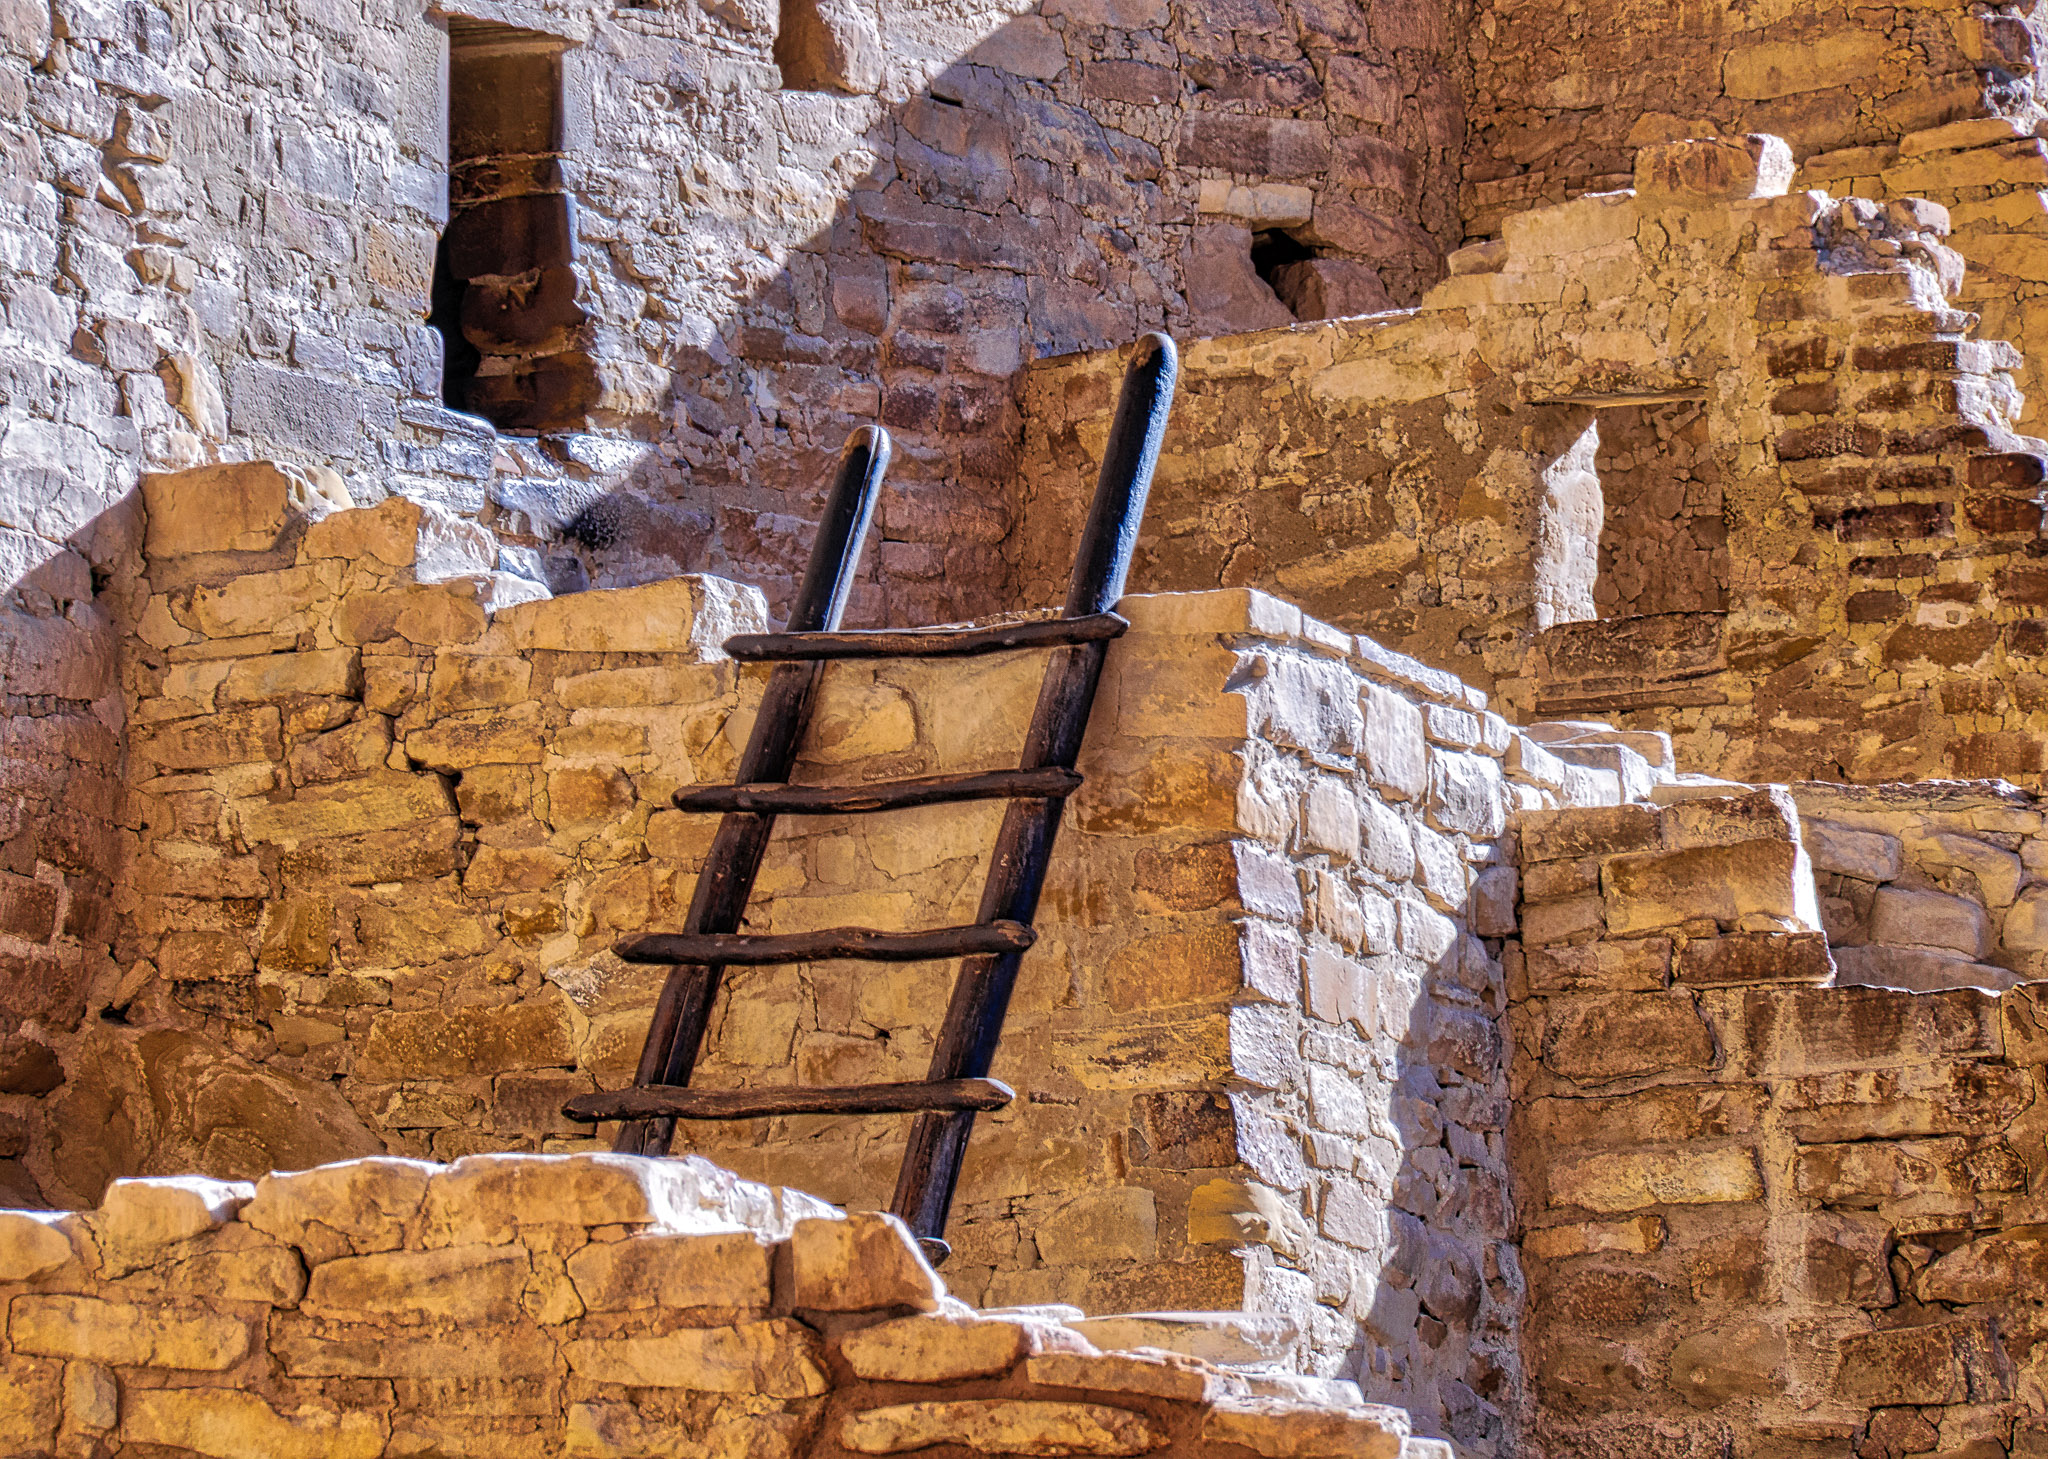 Ladder in the Cliff Palace Ruins in Mesa Verde National Park near Durango and Cortez, Colorado.